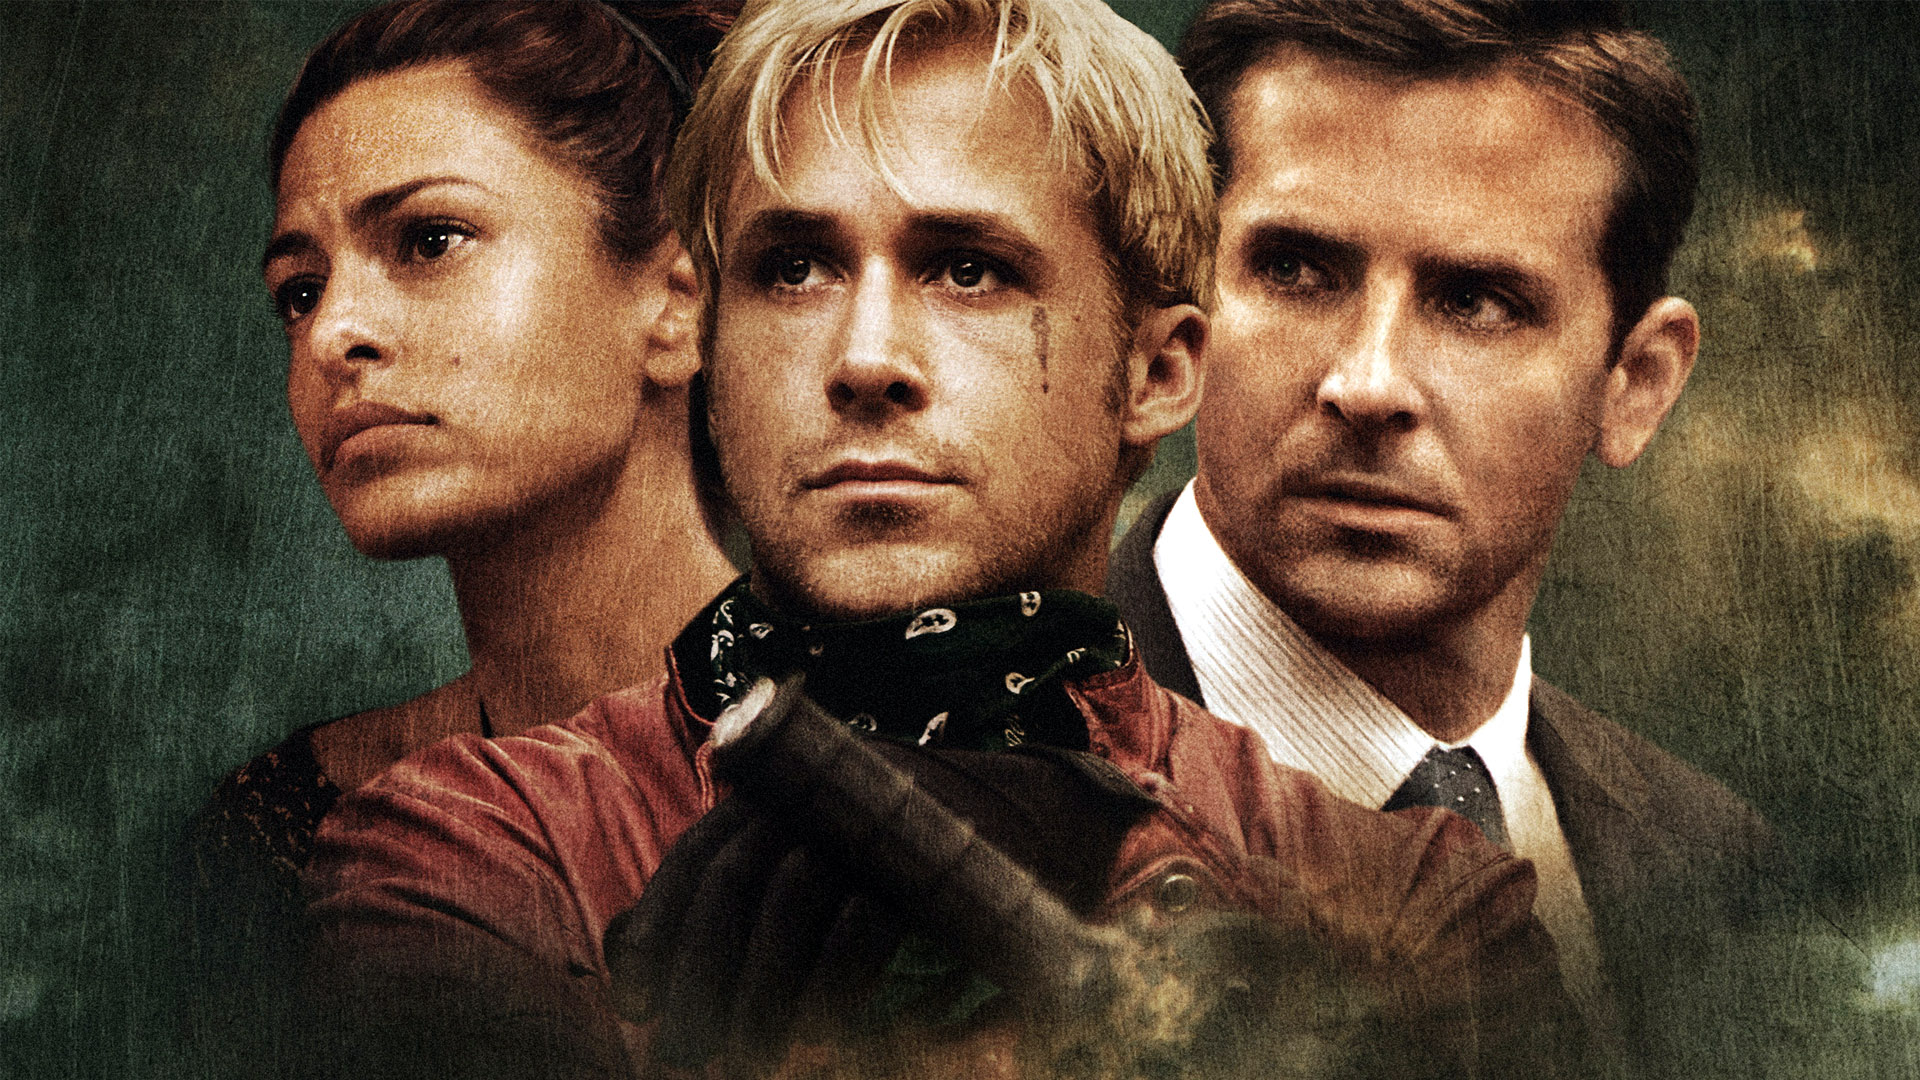 Avery Cross Bradley Cooper Eva Mendes Luke The Place Beyond The Pines Romina The Place Beyond The Pi 1920x1080